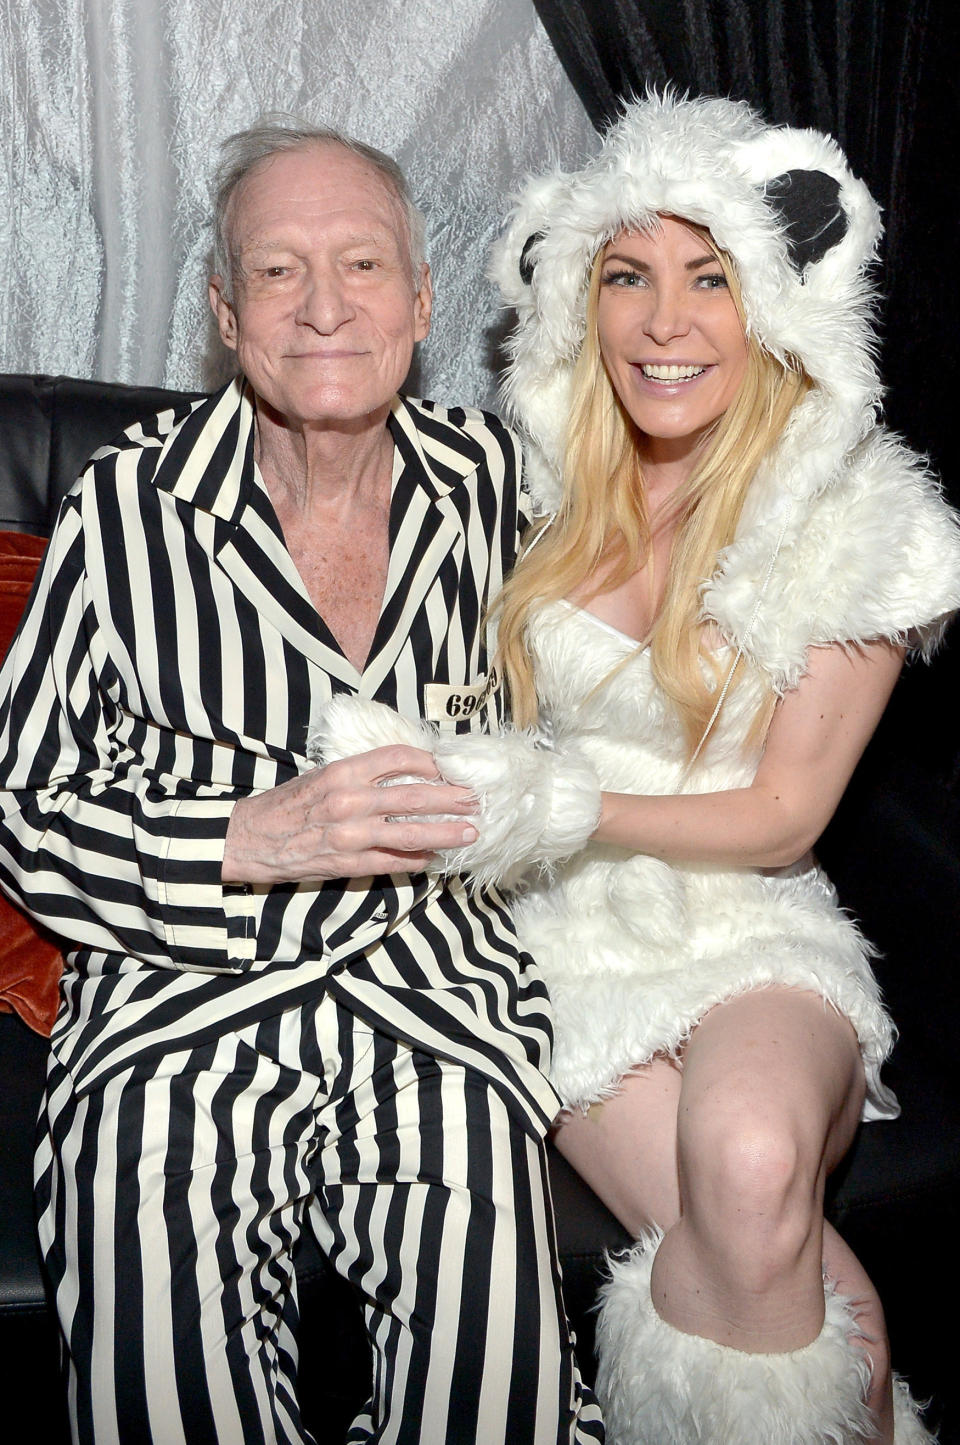 Hugh Hefner and wife Crystal Hefner attend the annual Halloween Party at the Playboy Mansion on Oct. 24, 2015. (Photo: Charley Gallay via Getty Images)